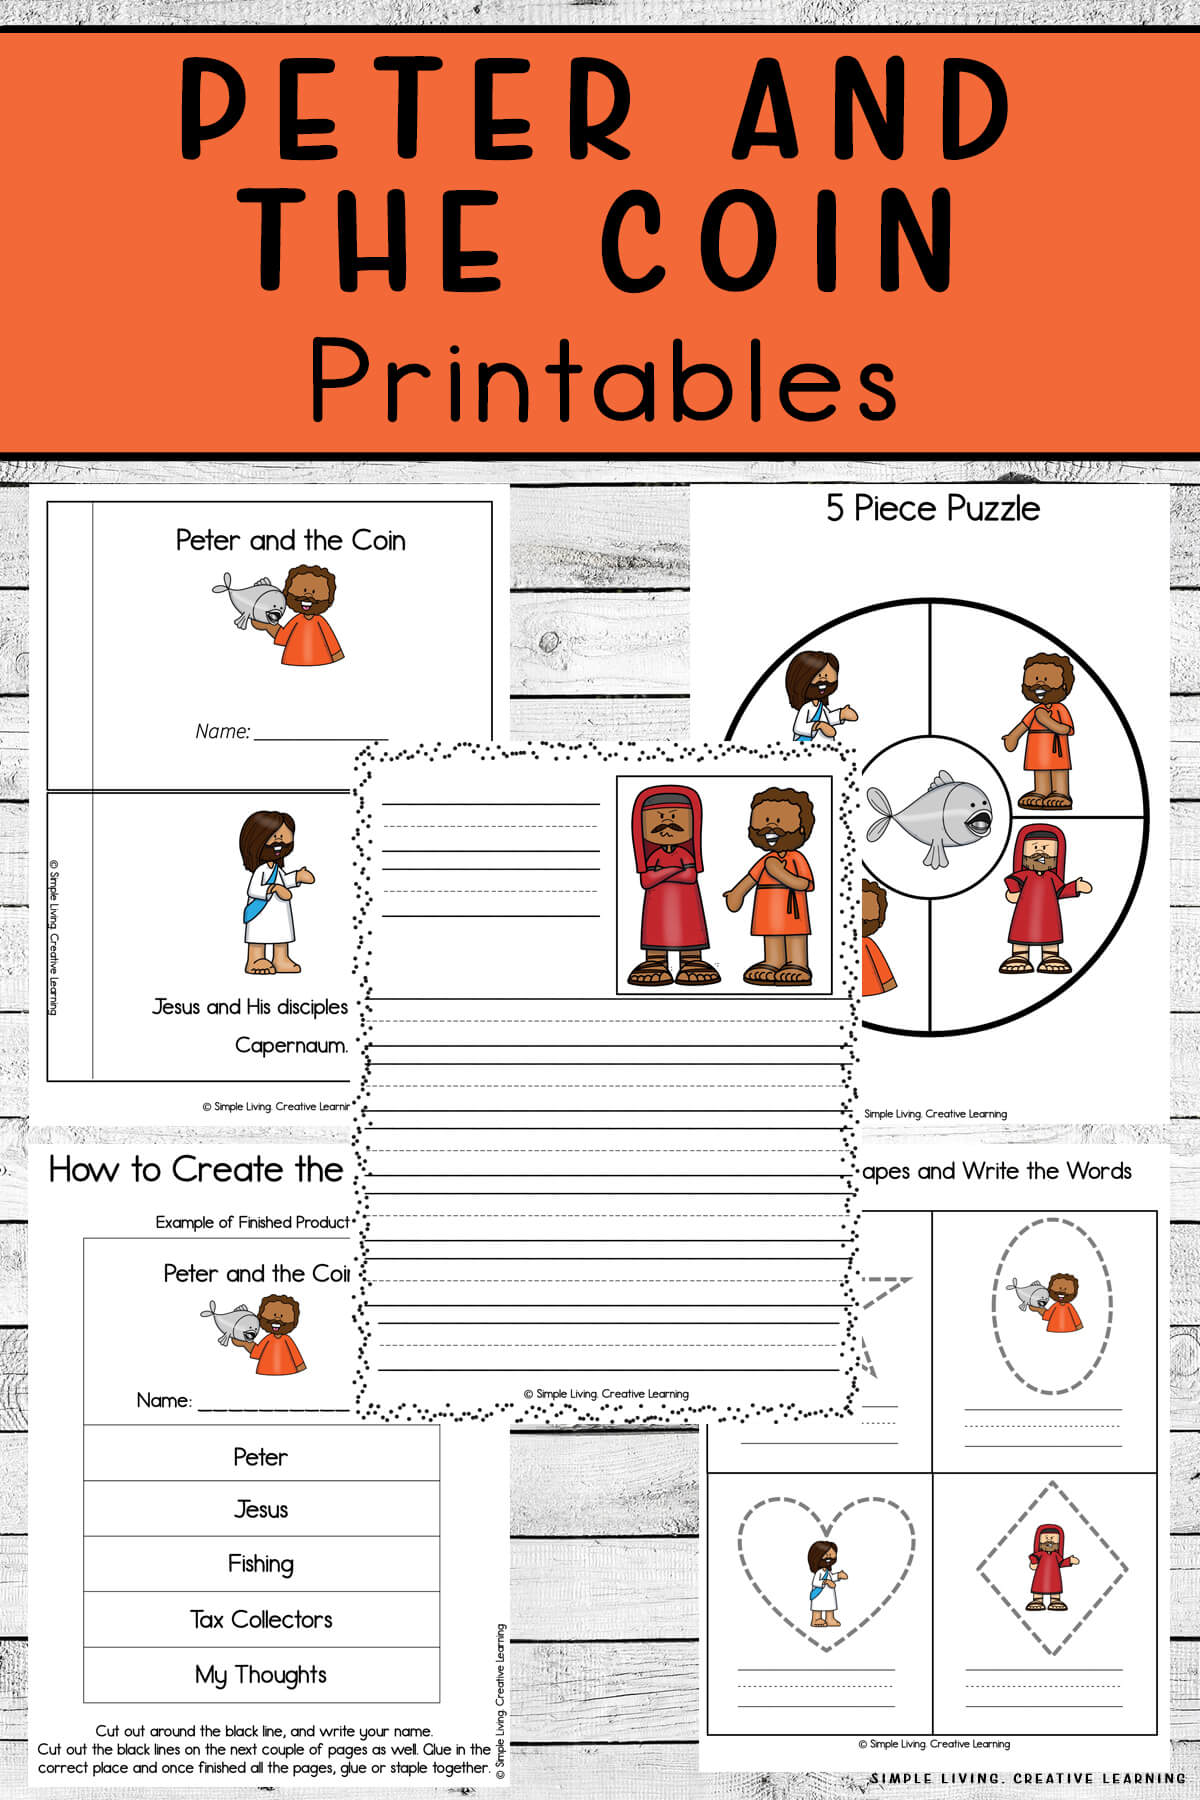 Peter and the Coin Printables